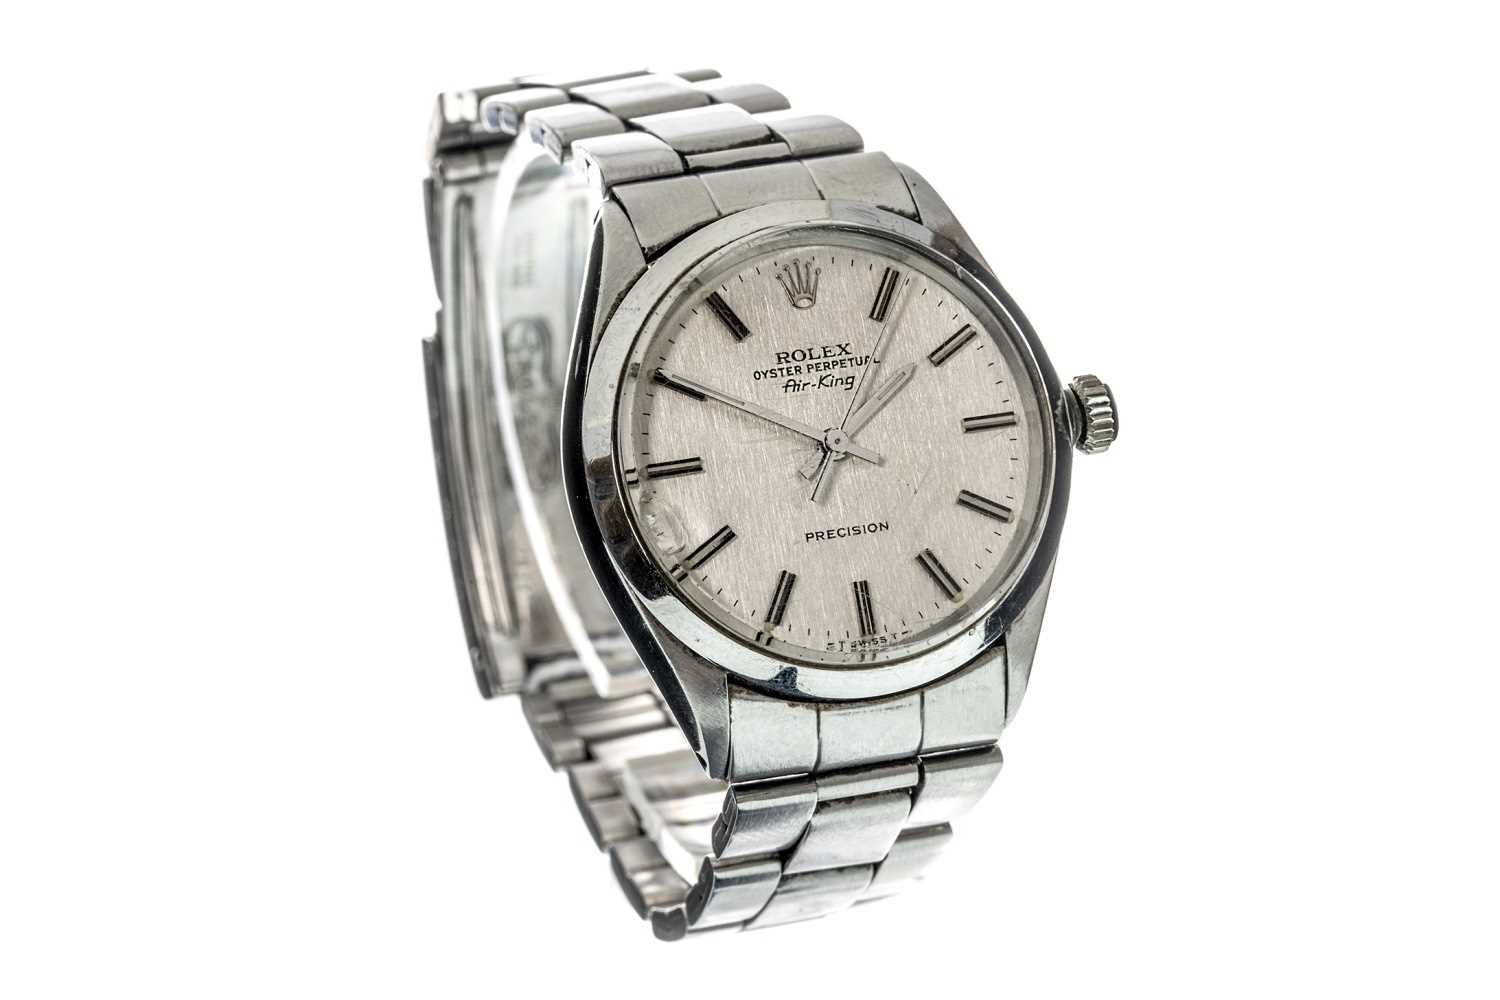 Lot 735 - GENTLEMAN’S ROLEX AIR KING STAINLESS STEEL AUTOMATIC WRIST WATCH